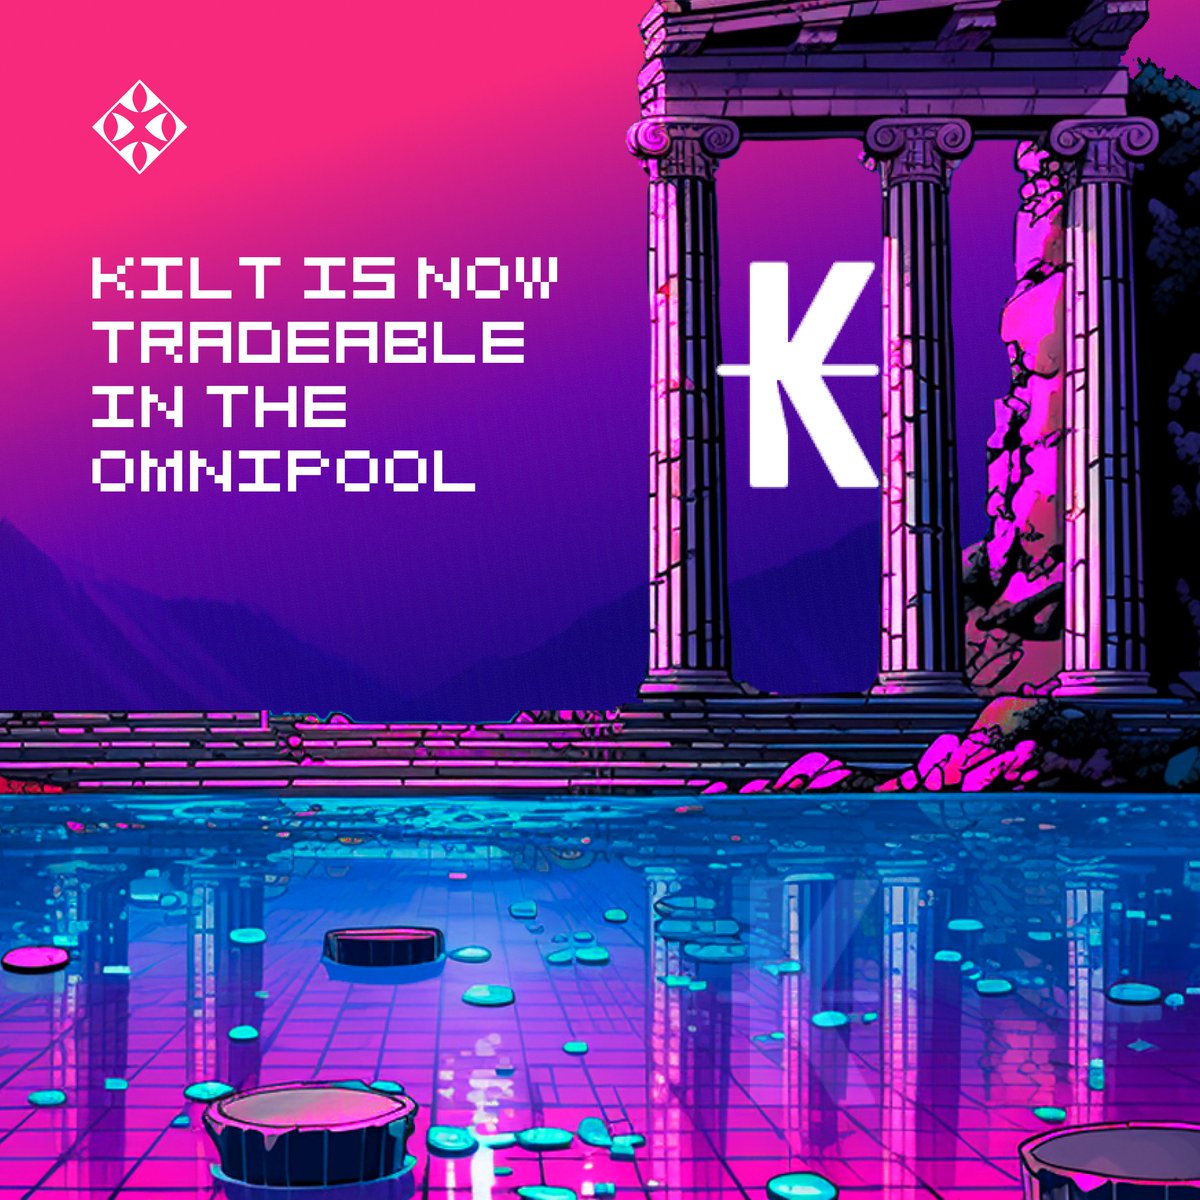 KILT - the native token of @Kiltprotocol - is now tradeable in the Omnipool; allowing swaps between KILT and over 30 other assets 🔀 250,000 KILT liquidity was provided trustlessly by the KILT Protocol Treasury - enacted through on-chain governance of KILT holders 🗳️ KILT is an…